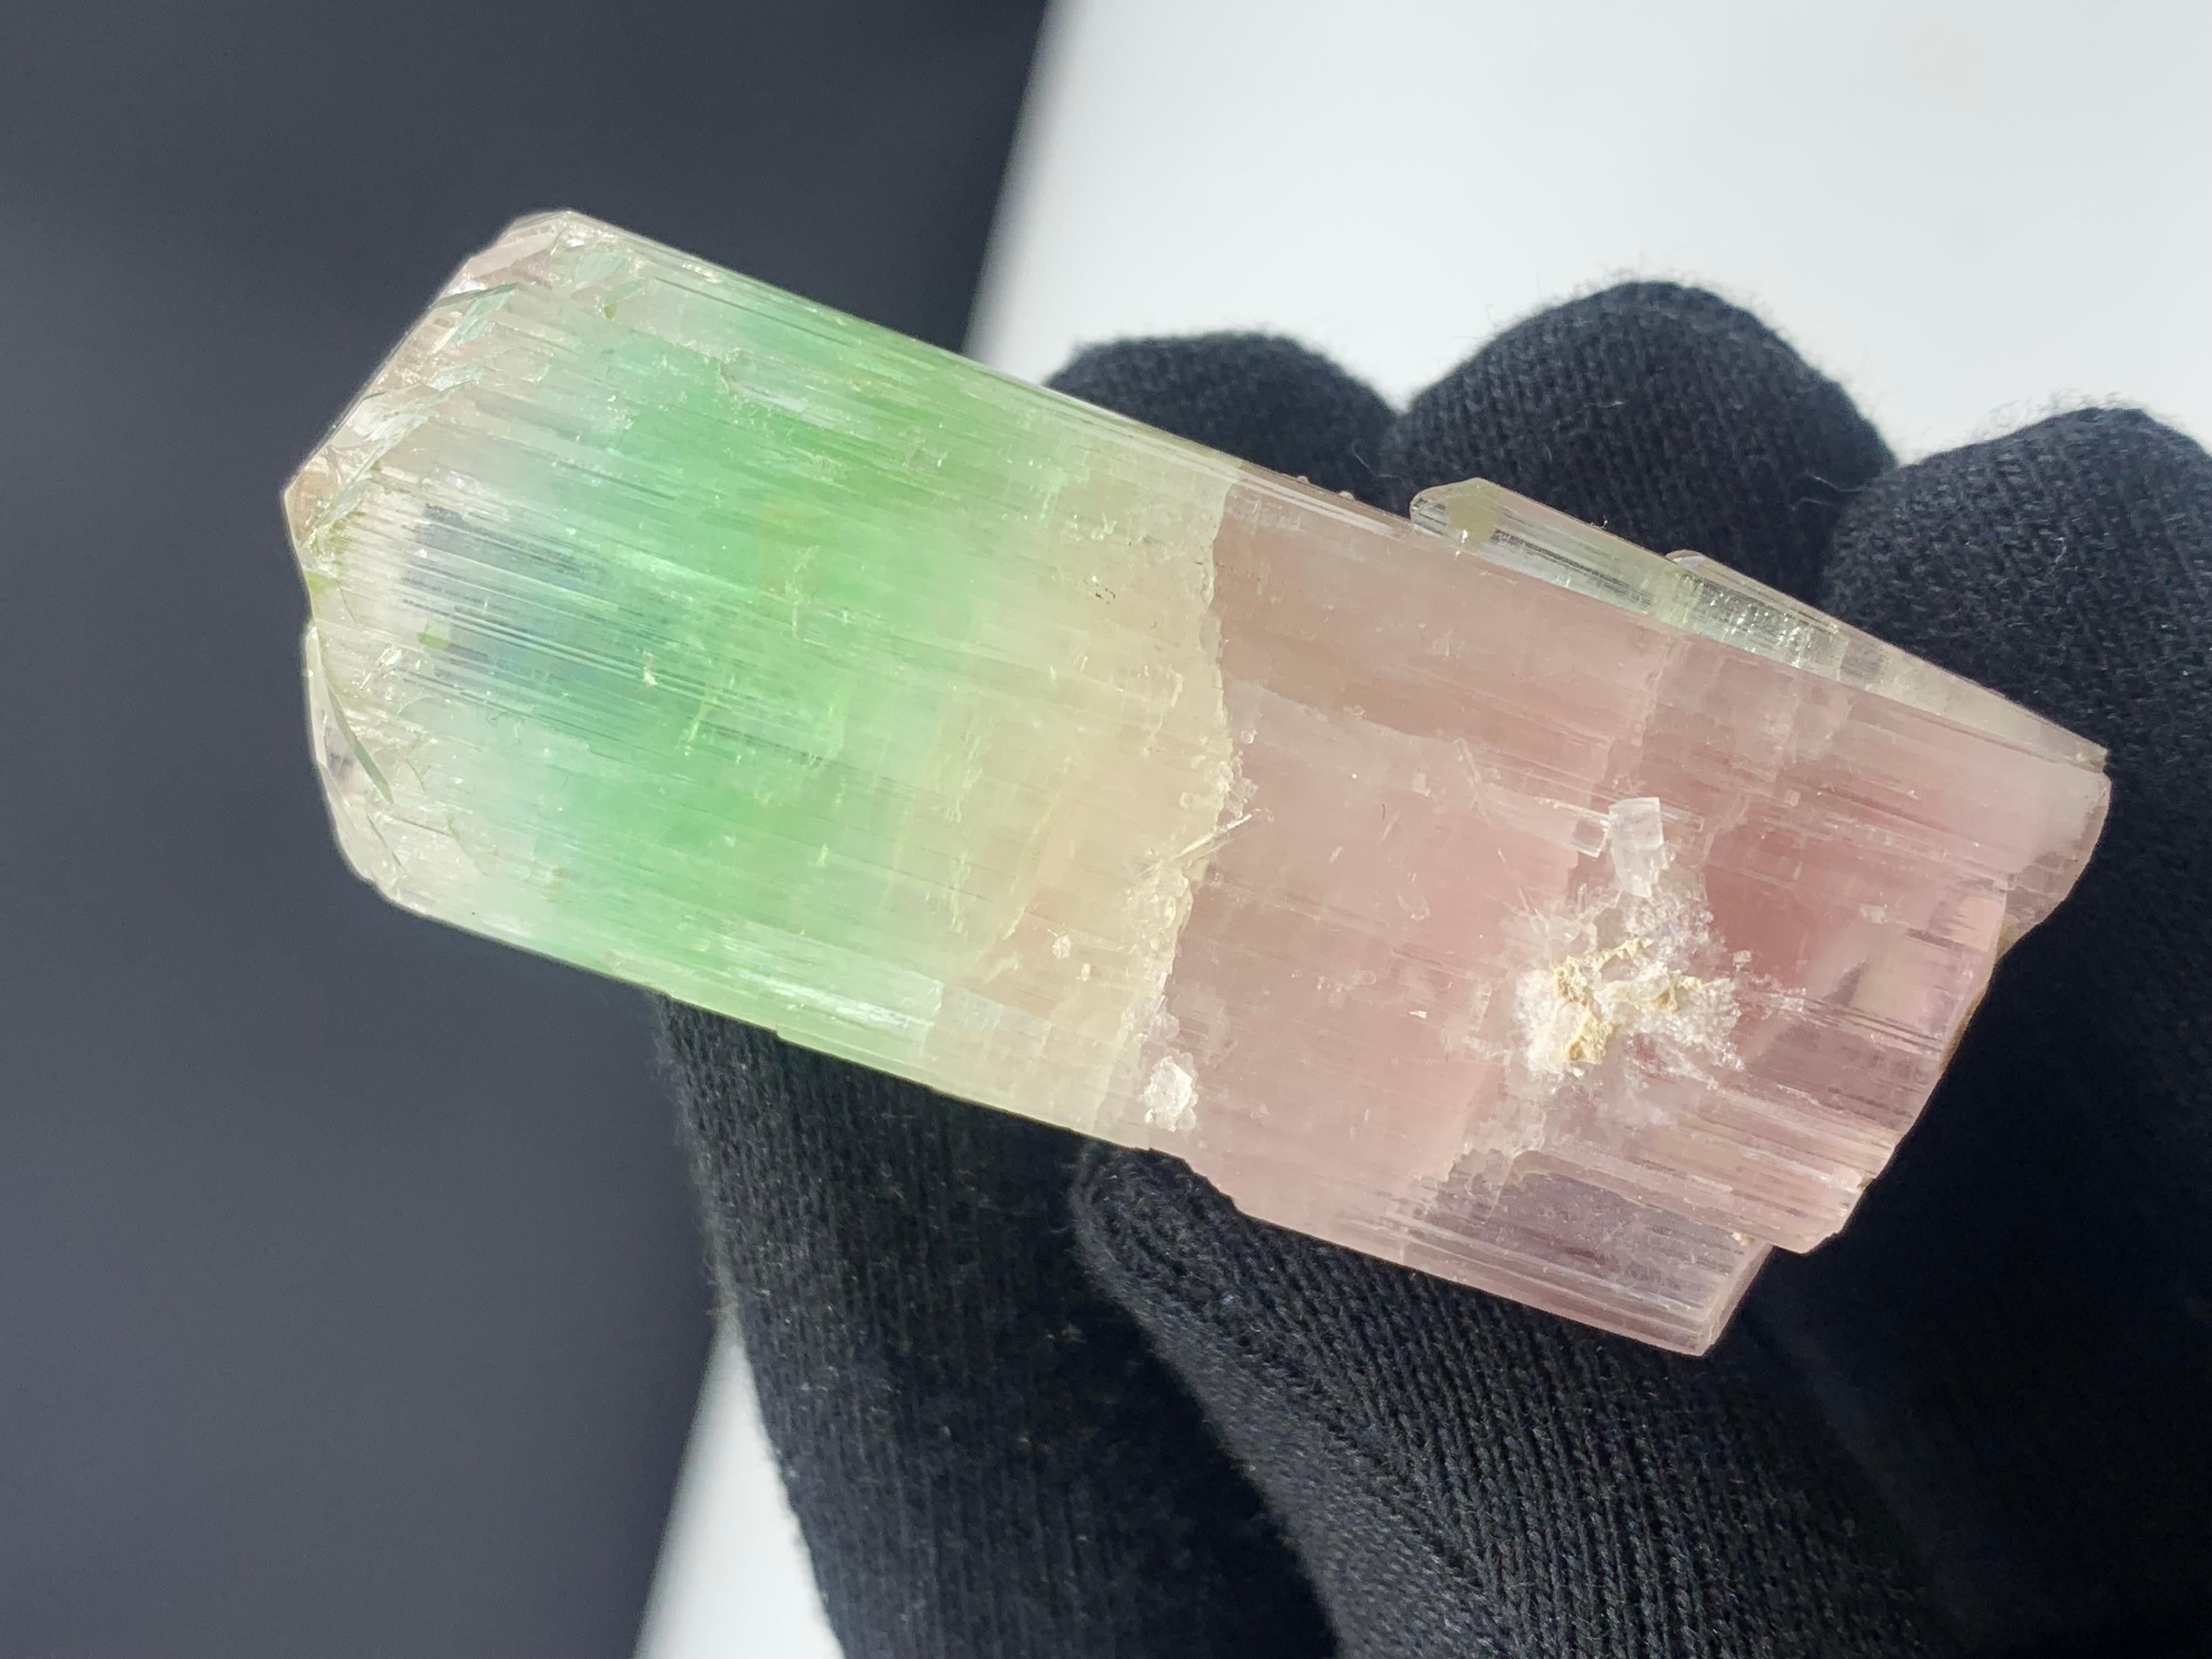 79.04 Gram Beautiful Bi-Color Tourmaline Crystal From Afghanistan 
WEIGHT: 79.04 grams
DIMENSIONS: 6.6 x 2.7 x 2.6 Cm
ORIGIN: Afghanistan
TREATMENT: None

Tourmaline is an extremely popular gemstone; the name Tourmaline is derived from